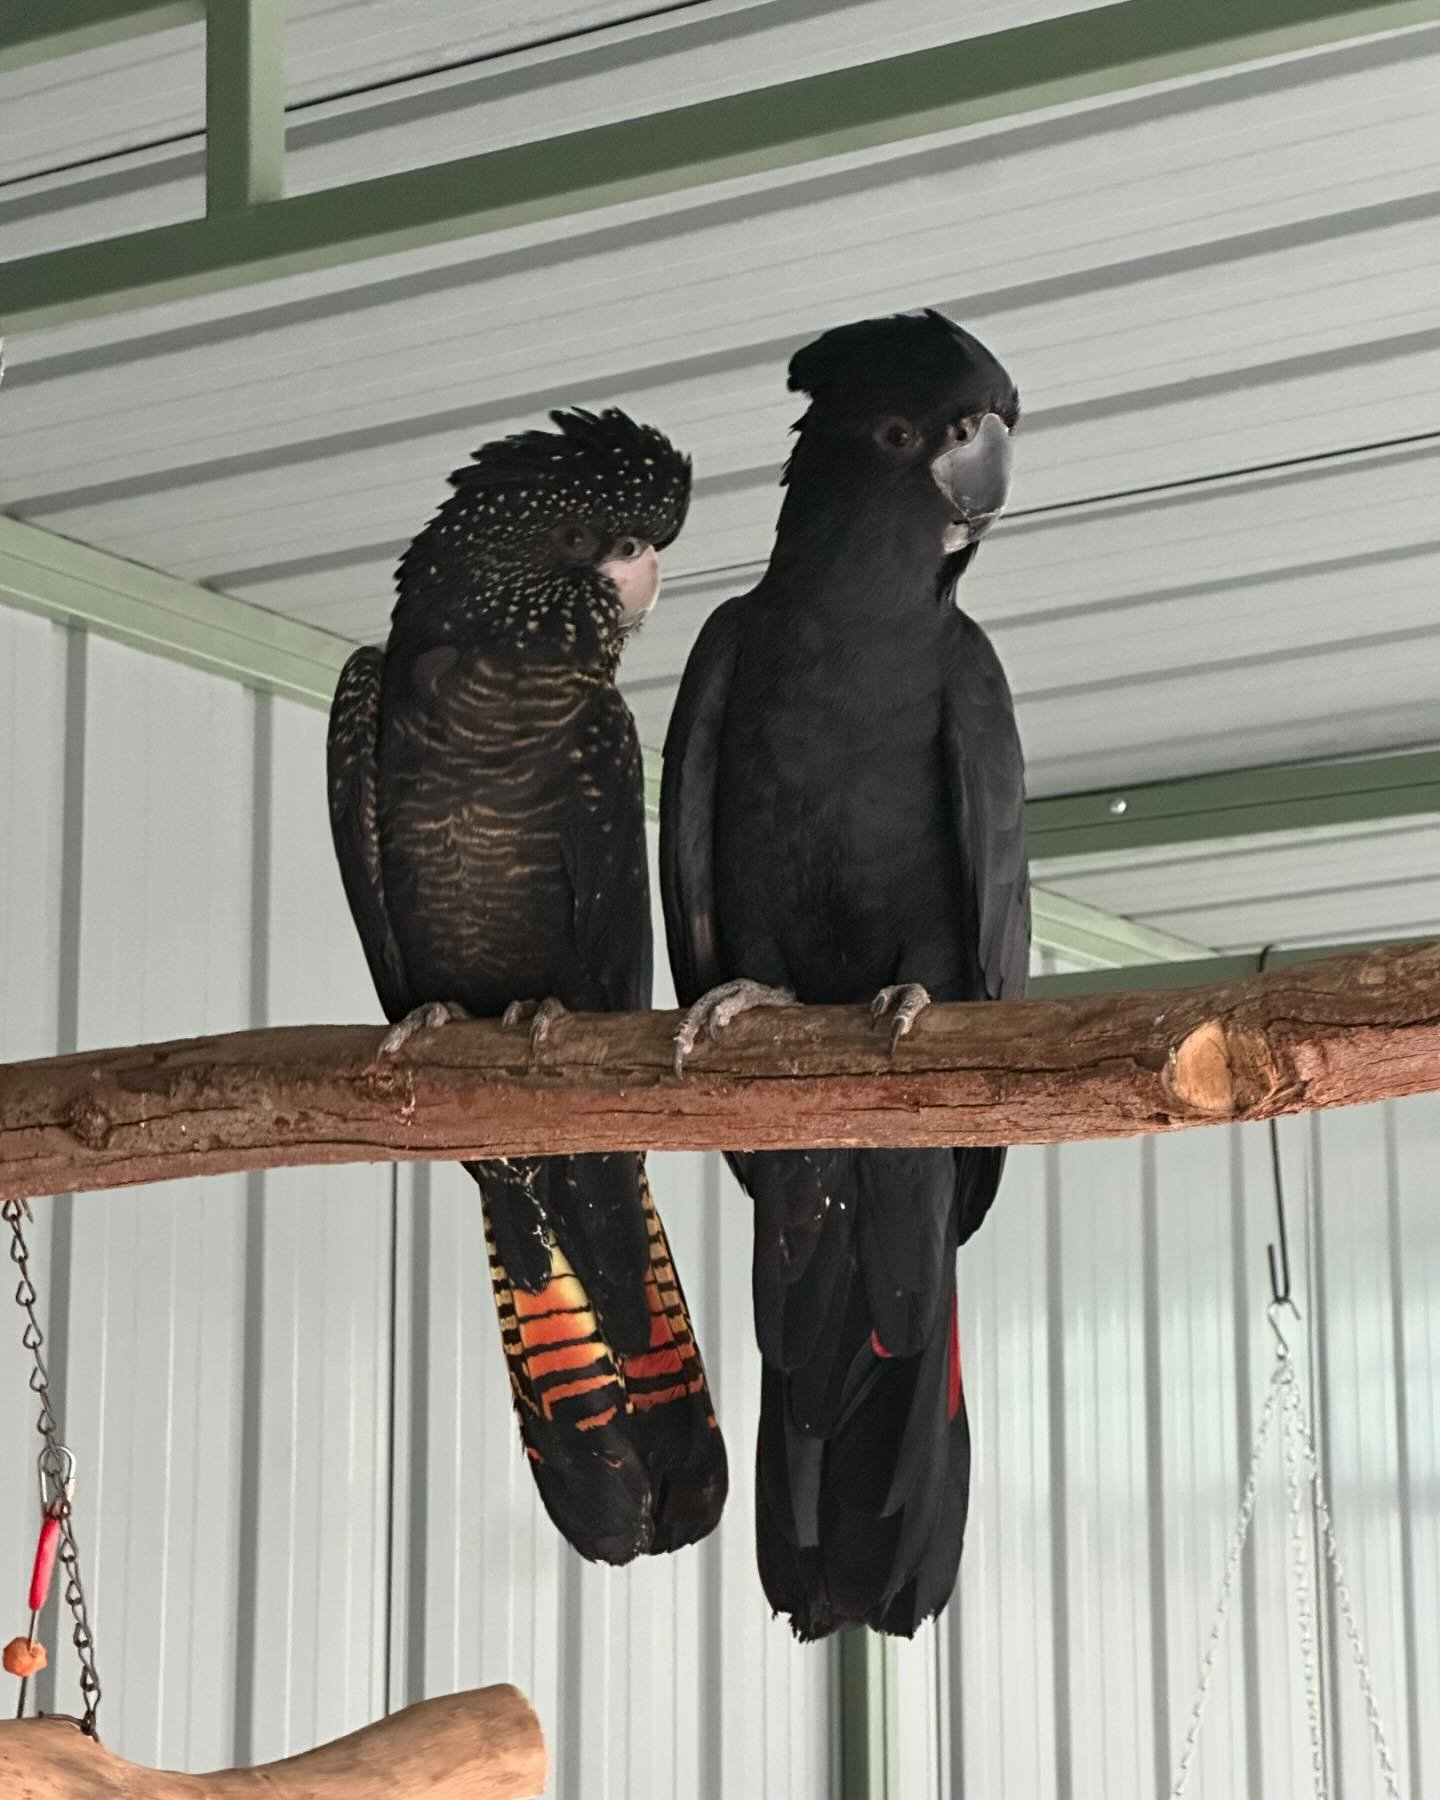 Introducing the TC Animals Program&rsquo;s newest feathered friends, Jarrah and Marri! They are a male and female Forest Red-tailed black cockatoo from Southern Western Australia in Noongar Country. 
You can tell that Jarrah is male while Marri is fe